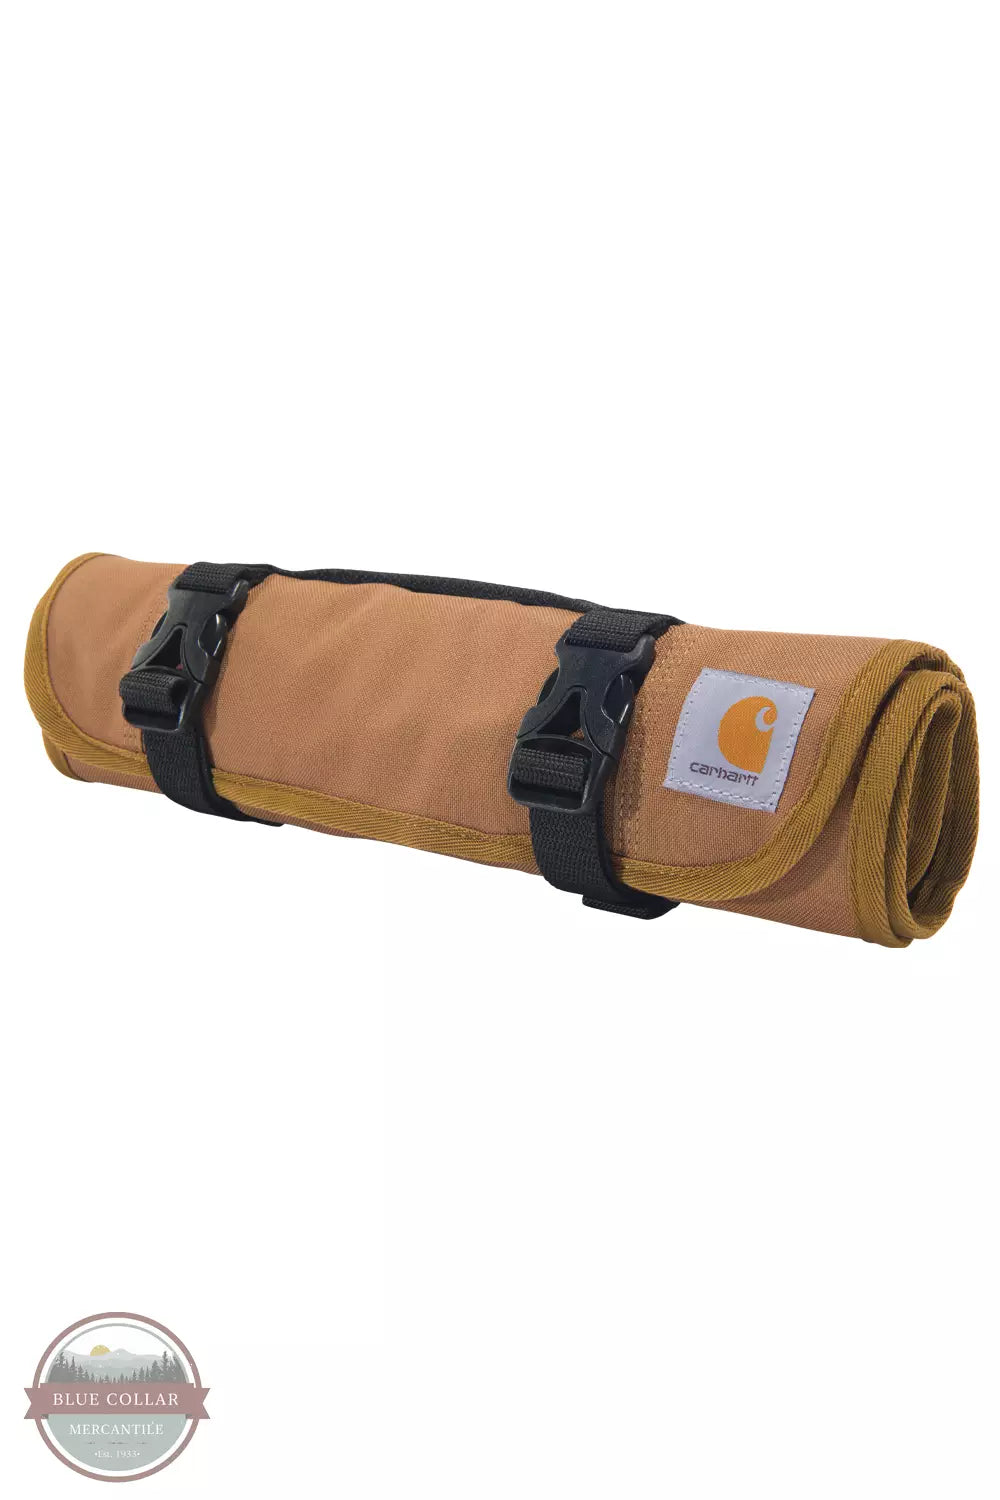 Carhartt B0000355 Utility Roll 18 Pocket Brown Rolled Up View